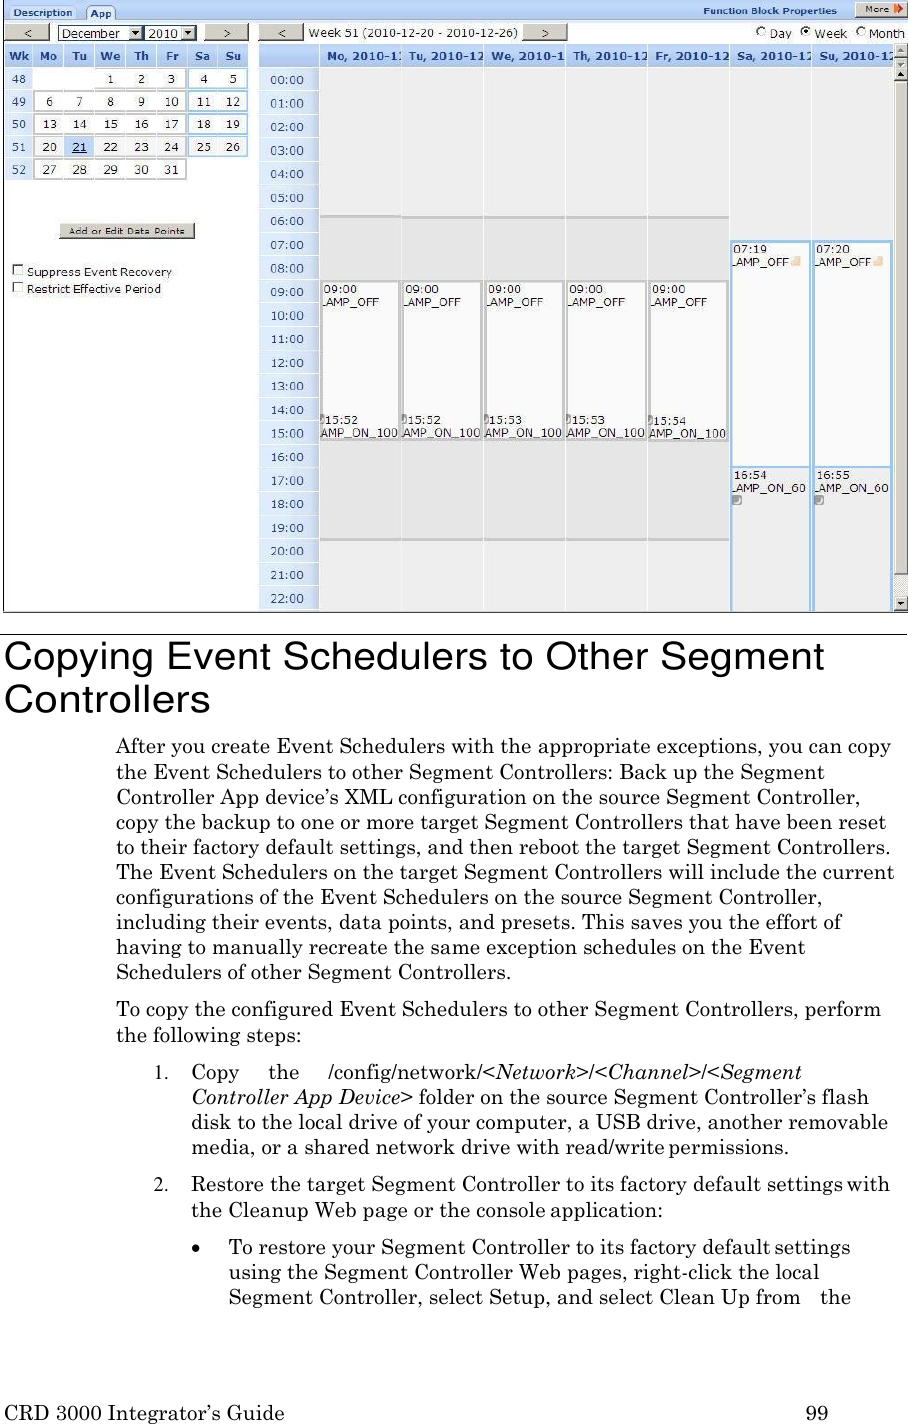 CRD 3000 Integrator’s Guide 99    Copying Event Schedulers to Other Segment Controllers After you create Event Schedulers with the appropriate exceptions, you can copy the Event Schedulers to other Segment Controllers: Back up the Segment Controller App device’s XML configuration on the source Segment Controller, copy the backup to one or more target Segment Controllers that have been reset to their factory default settings, and then reboot the target Segment Controllers. The Event Schedulers on the target Segment Controllers will include the current configurations of the Event Schedulers on the source Segment Controller, including their events, data points, and presets. This saves you the effort of having to manually recreate the same exception schedules on the Event Schedulers of other Segment Controllers. To copy the configured Event Schedulers to other Segment Controllers, perform the following steps: 1. Copy     the     /config/network/&lt;Network&gt;/&lt;Channel&gt;/&lt;Segment Controller App Device&gt; folder on the source Segment Controller’s flash disk to the local drive of your computer, a USB drive, another removable media, or a shared network drive with read/write permissions. 2. Restore the target Segment Controller to its factory default settings with the Cleanup Web page or the console application:  To restore your Segment Controller to its factory default settings using the Segment Controller Web pages, right-click the local Segment Controller, select Setup, and select Clean Up from   the 